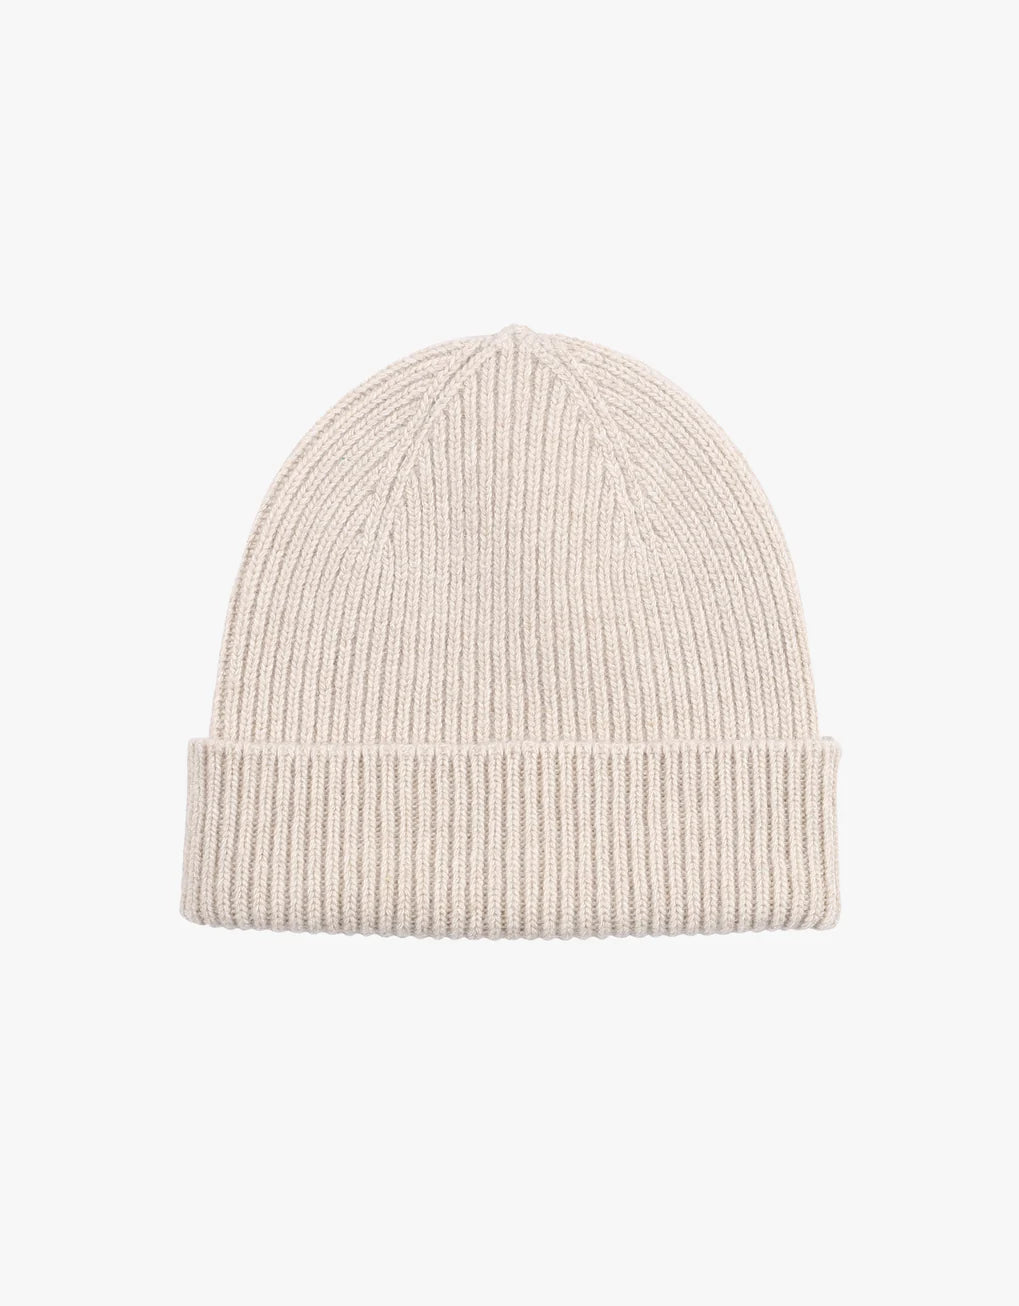 A Colorful Standard Merino Wool Beanie in beige on a white background, perfect for the cold season.